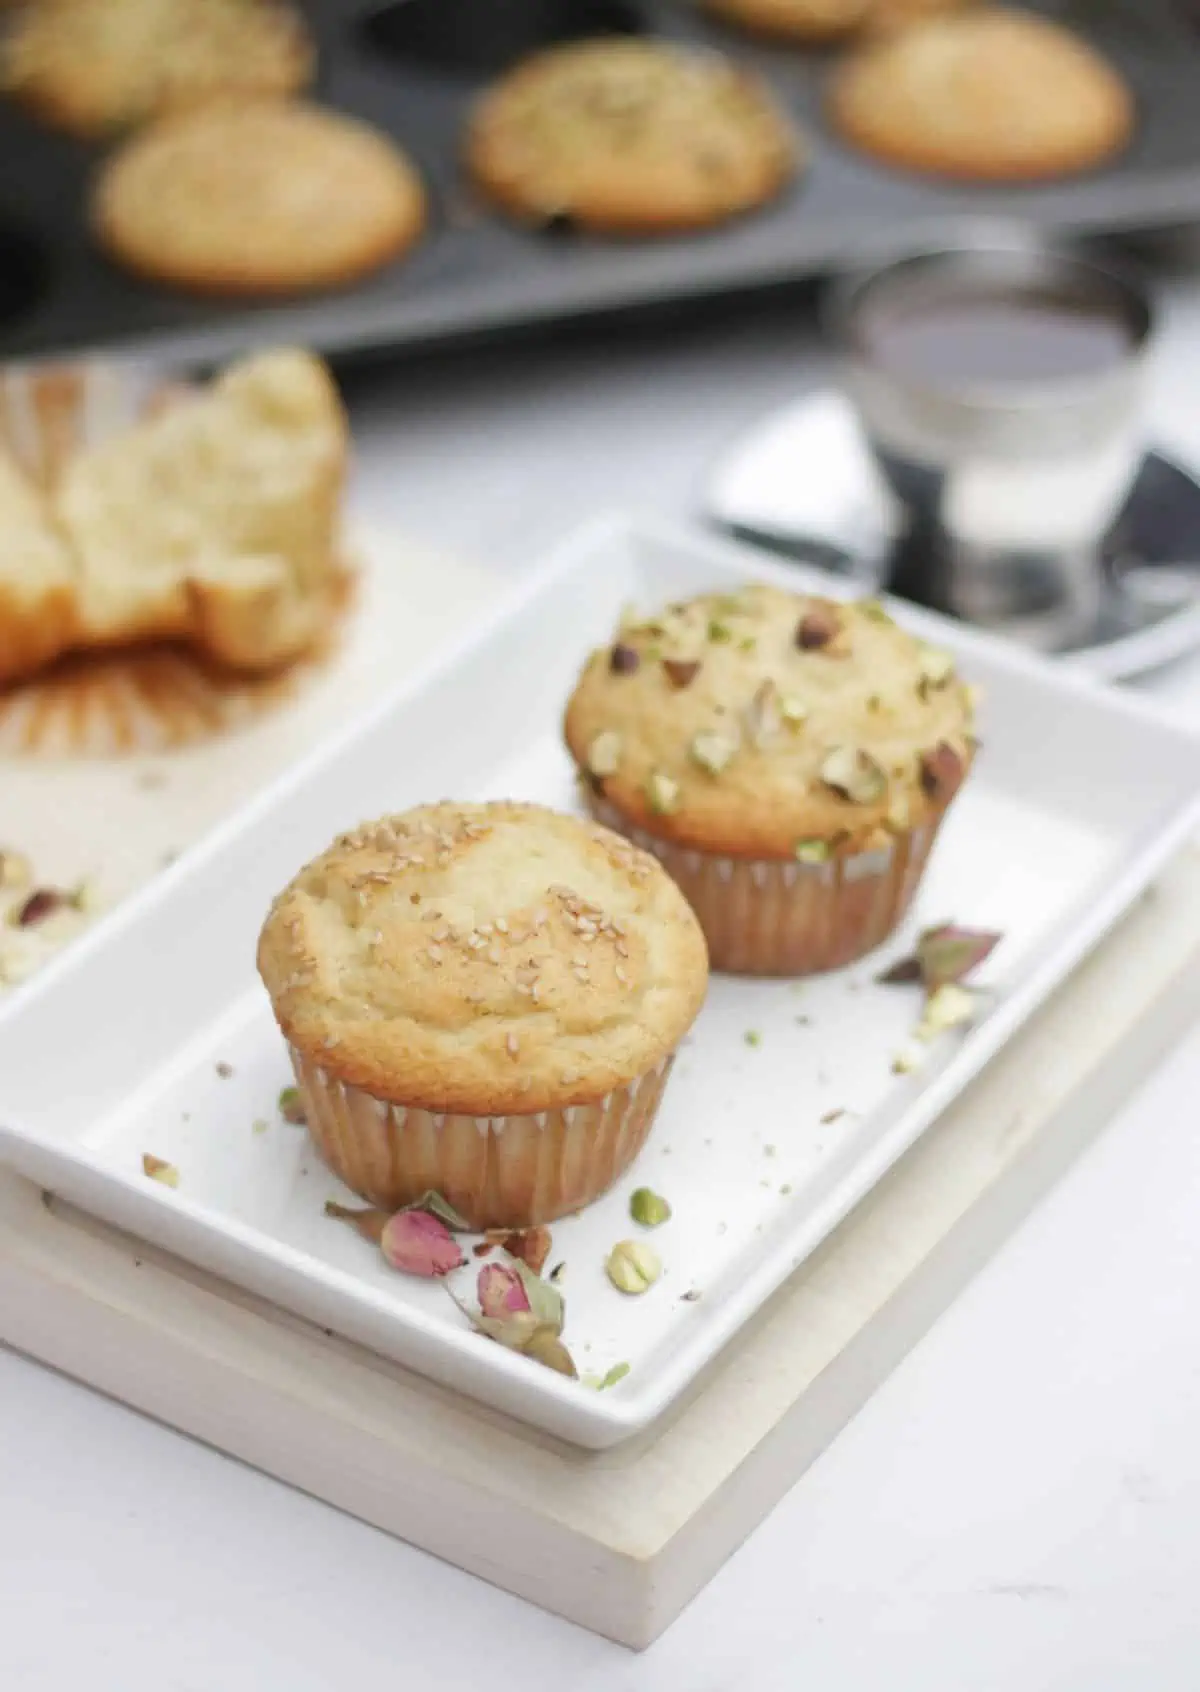 Two muffins in a plate.